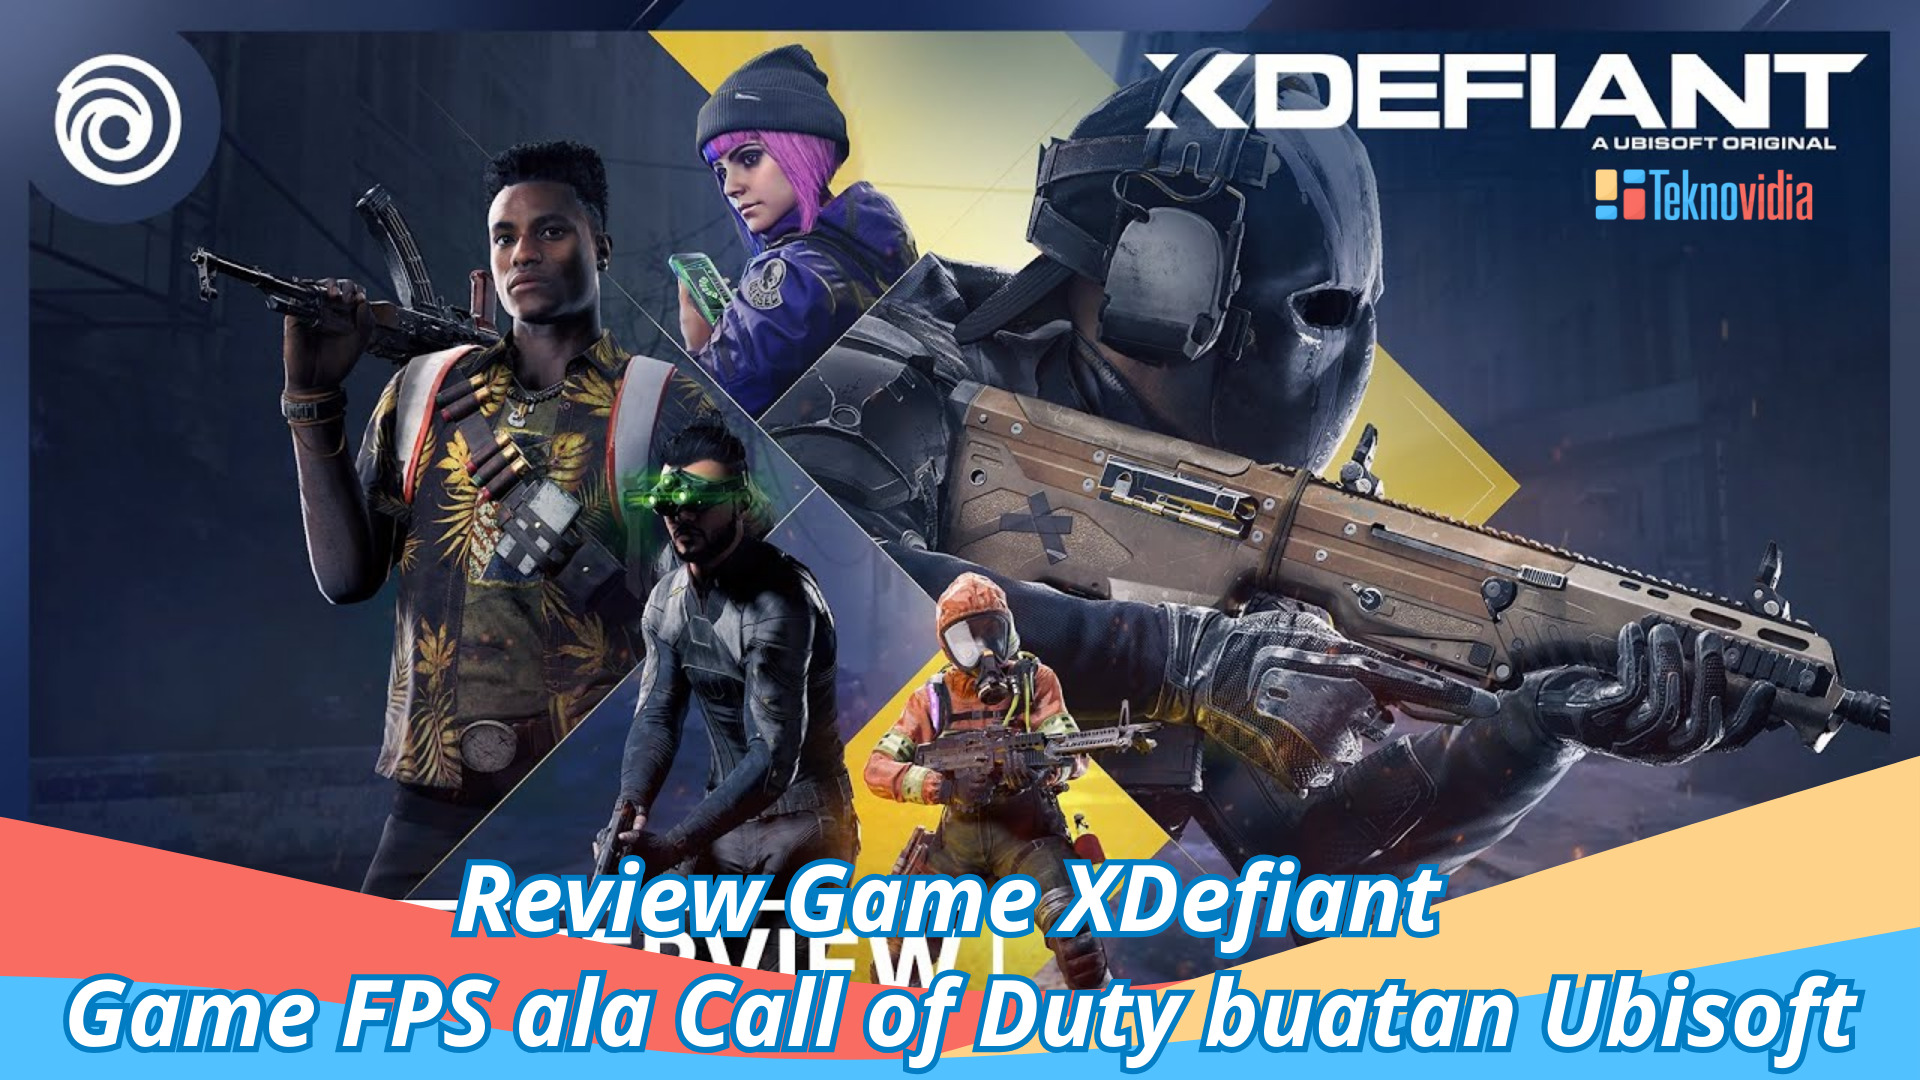 Review Game XDefiant Game FPS ala Call of Duty buatan Ubisoft